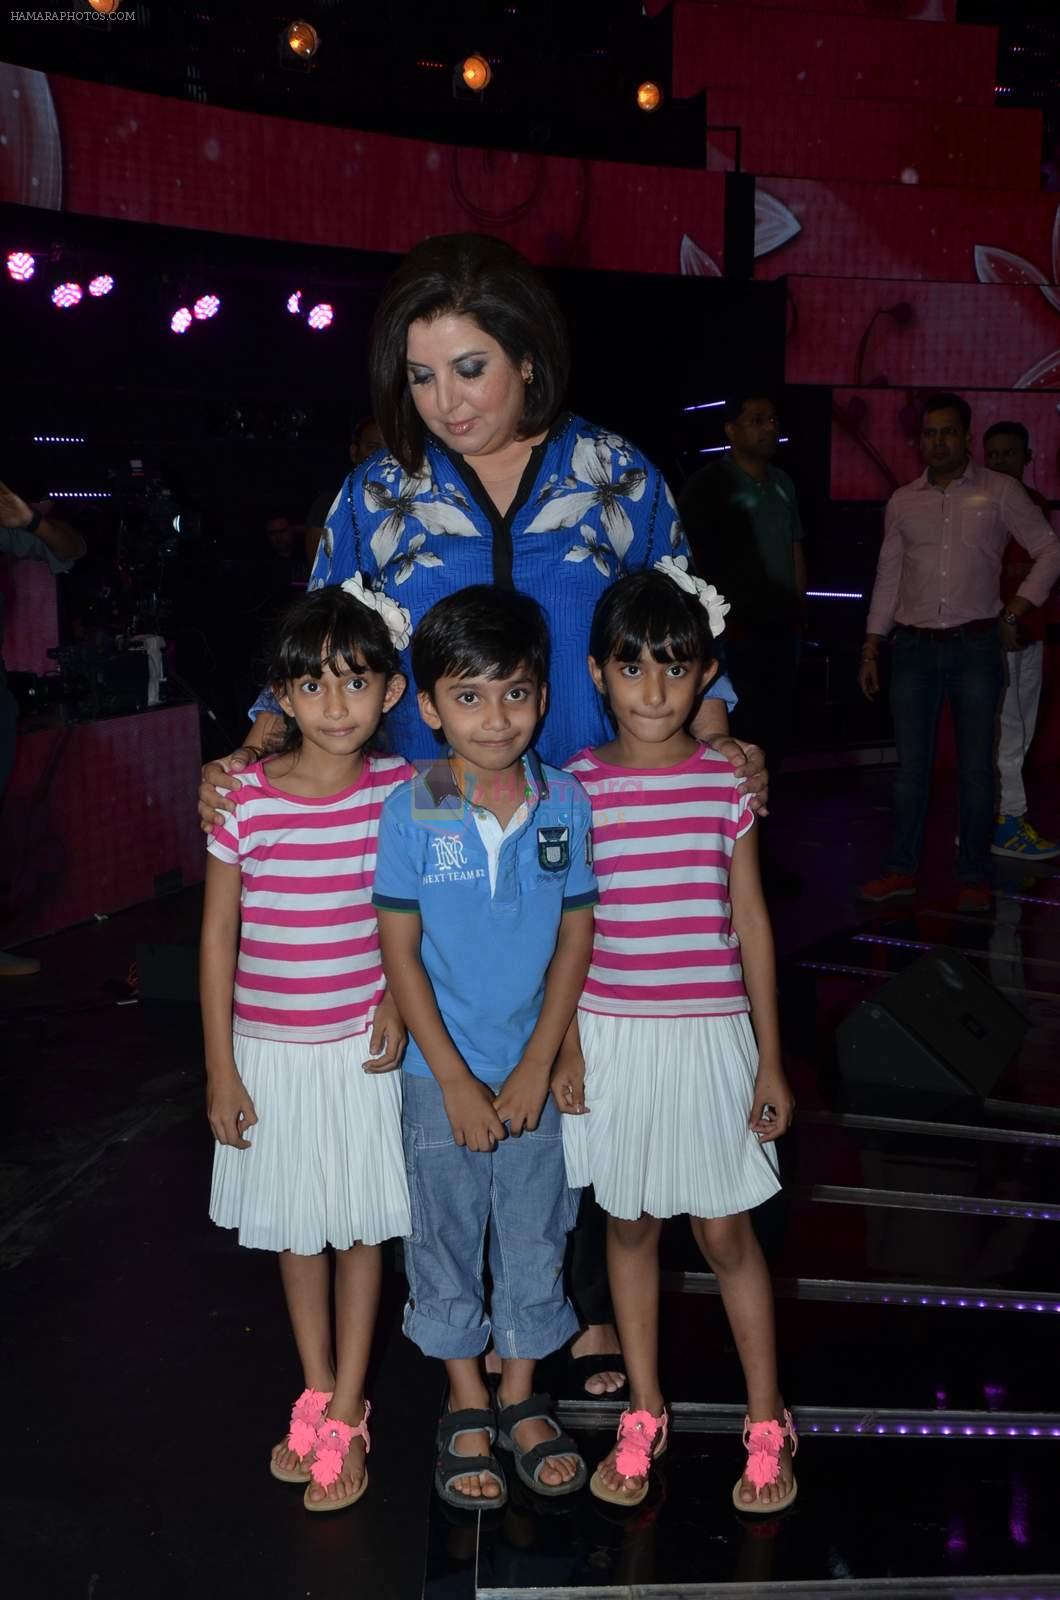 Farah Khan at Indian Idol episode special in Filmcity on 15th Sept 2015